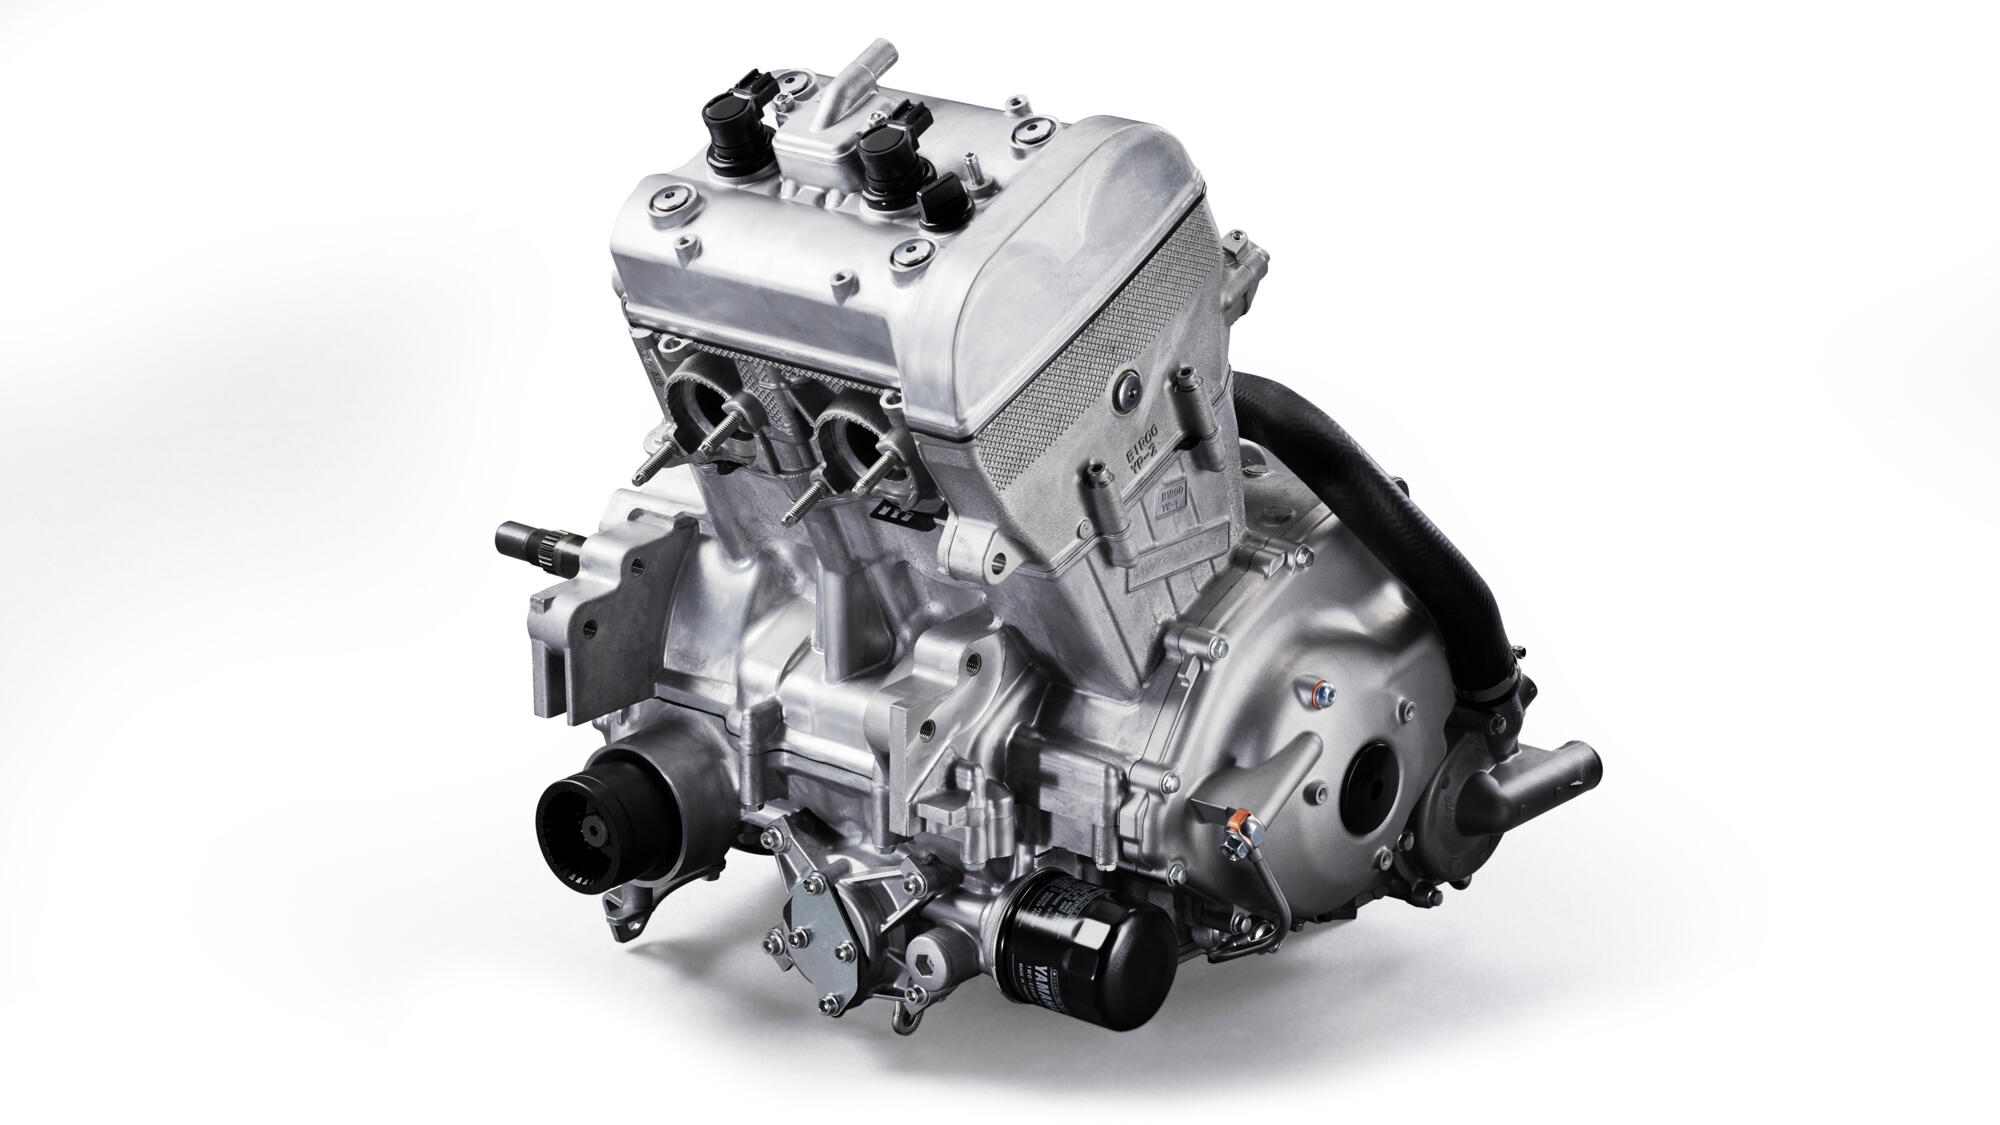 Powerful 999cc parallel twin engine